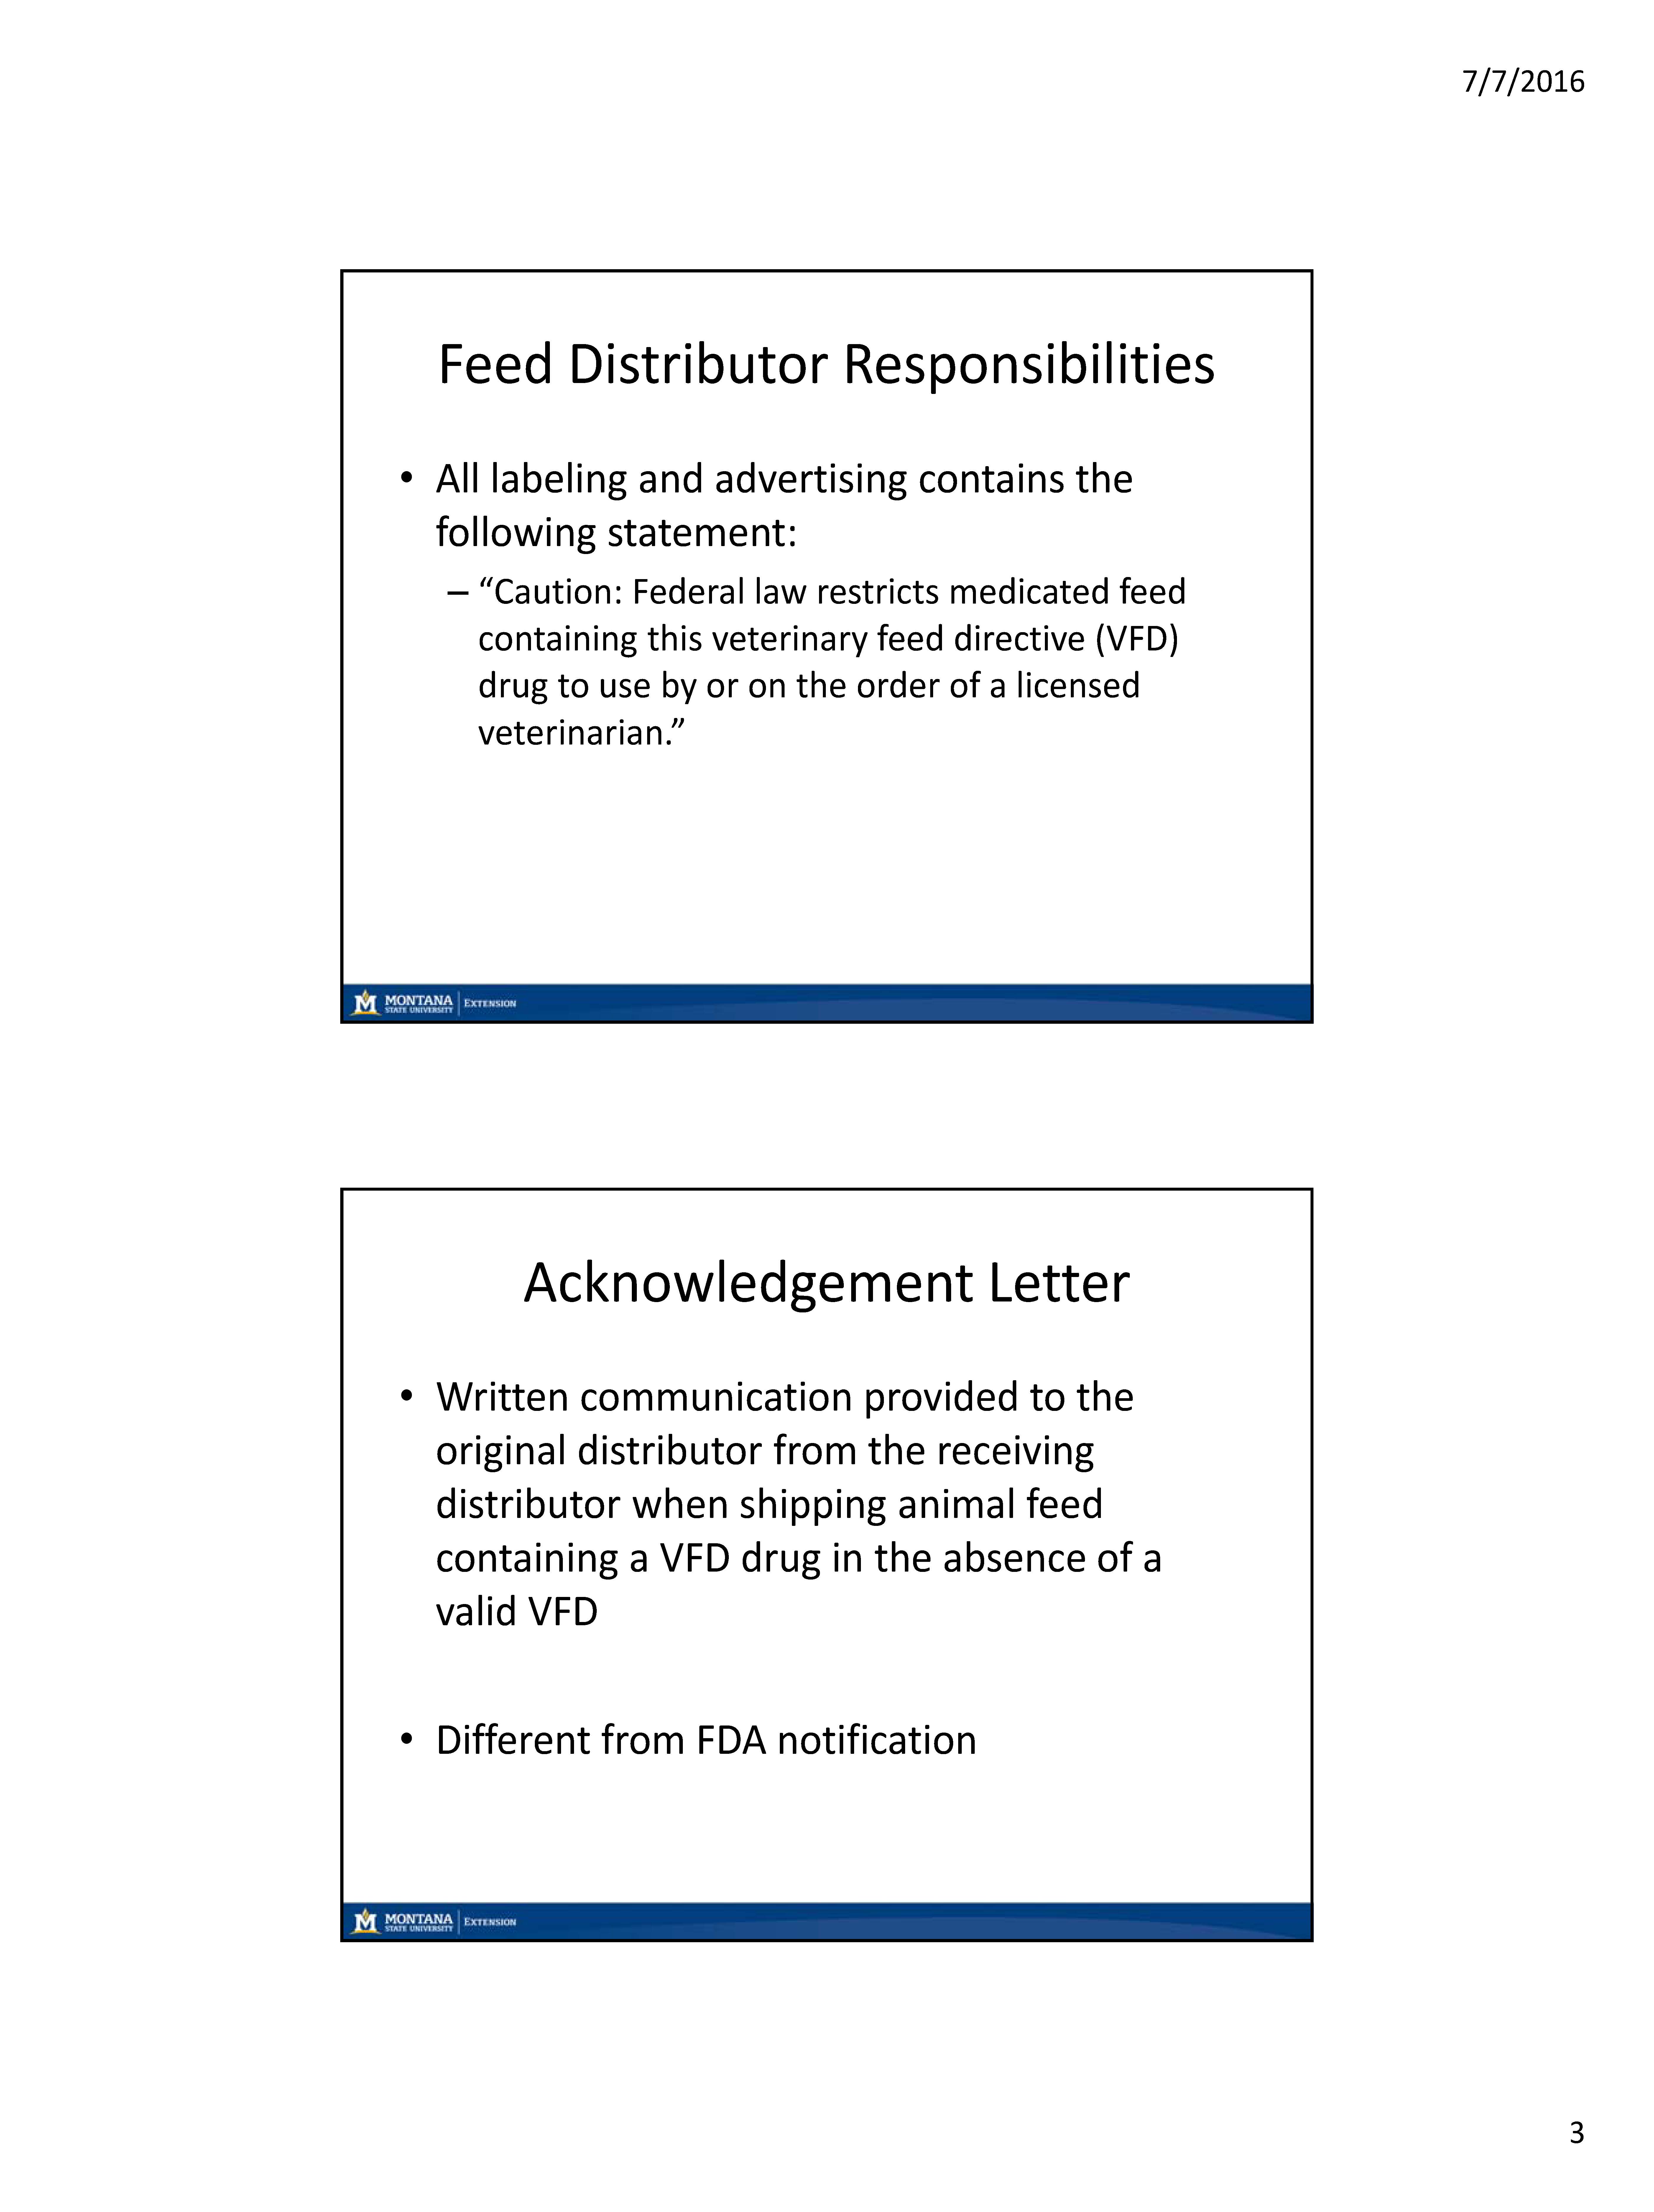 Slides used in the VFD short course regarding Feed Distributor Responsibilities, Minor Species, 4‐H,and Other Questions.